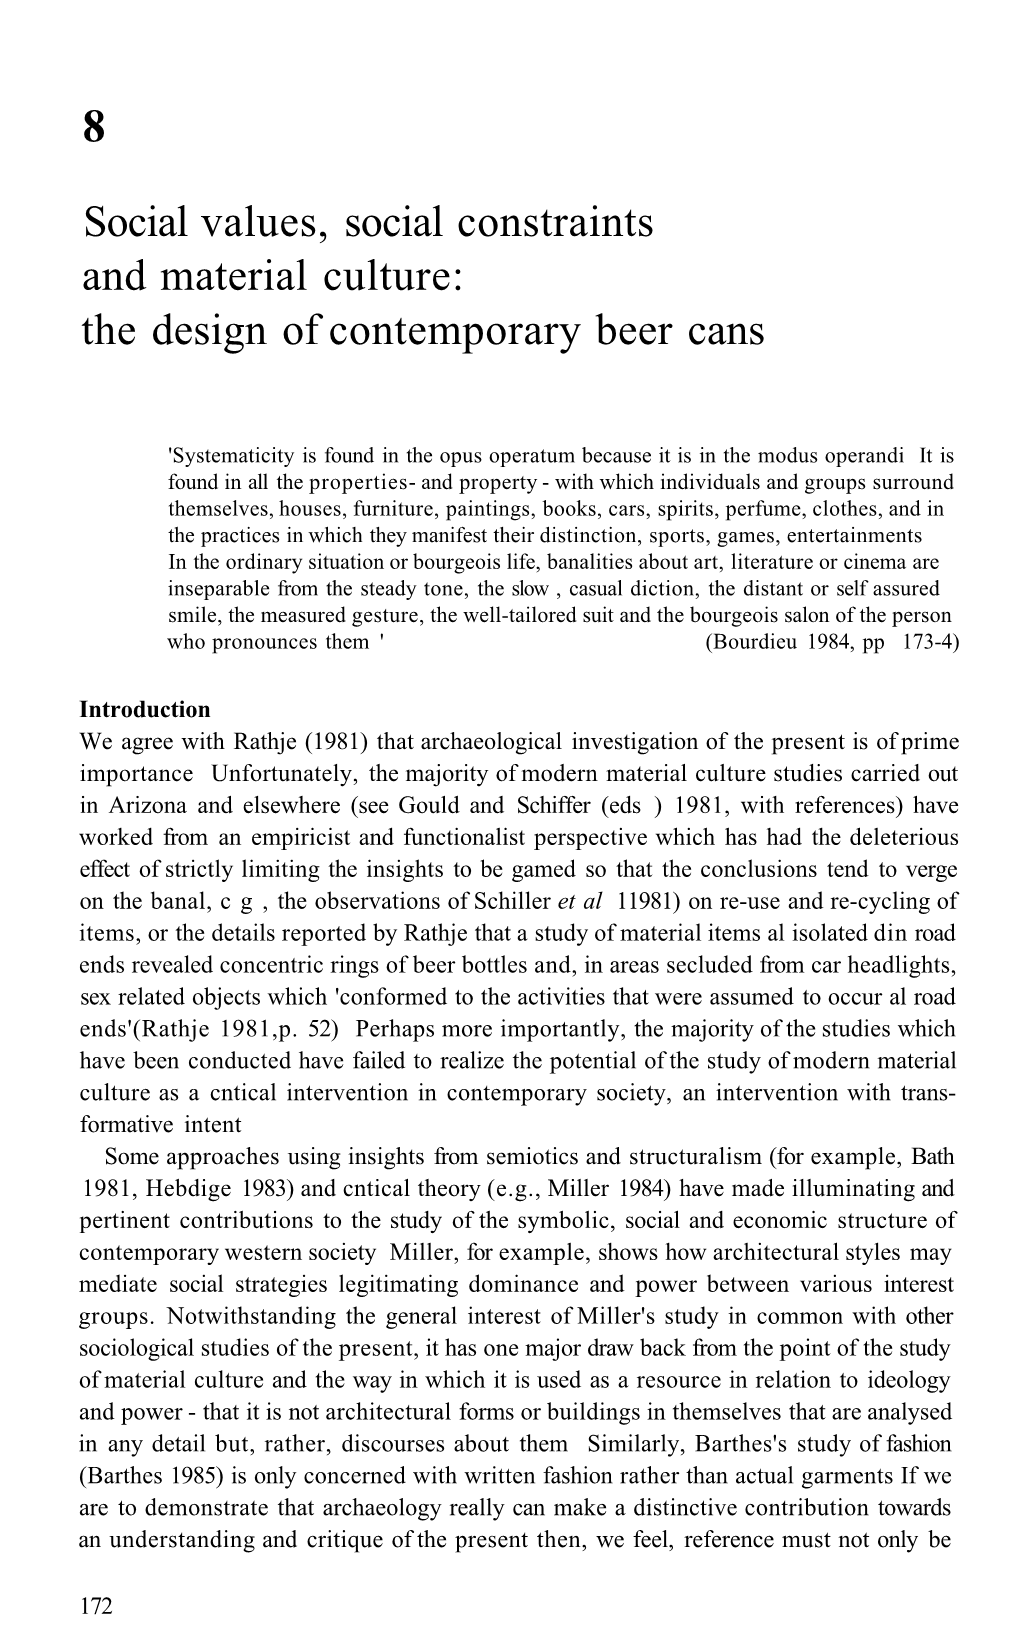 The Design of Contemporary Beer Cans